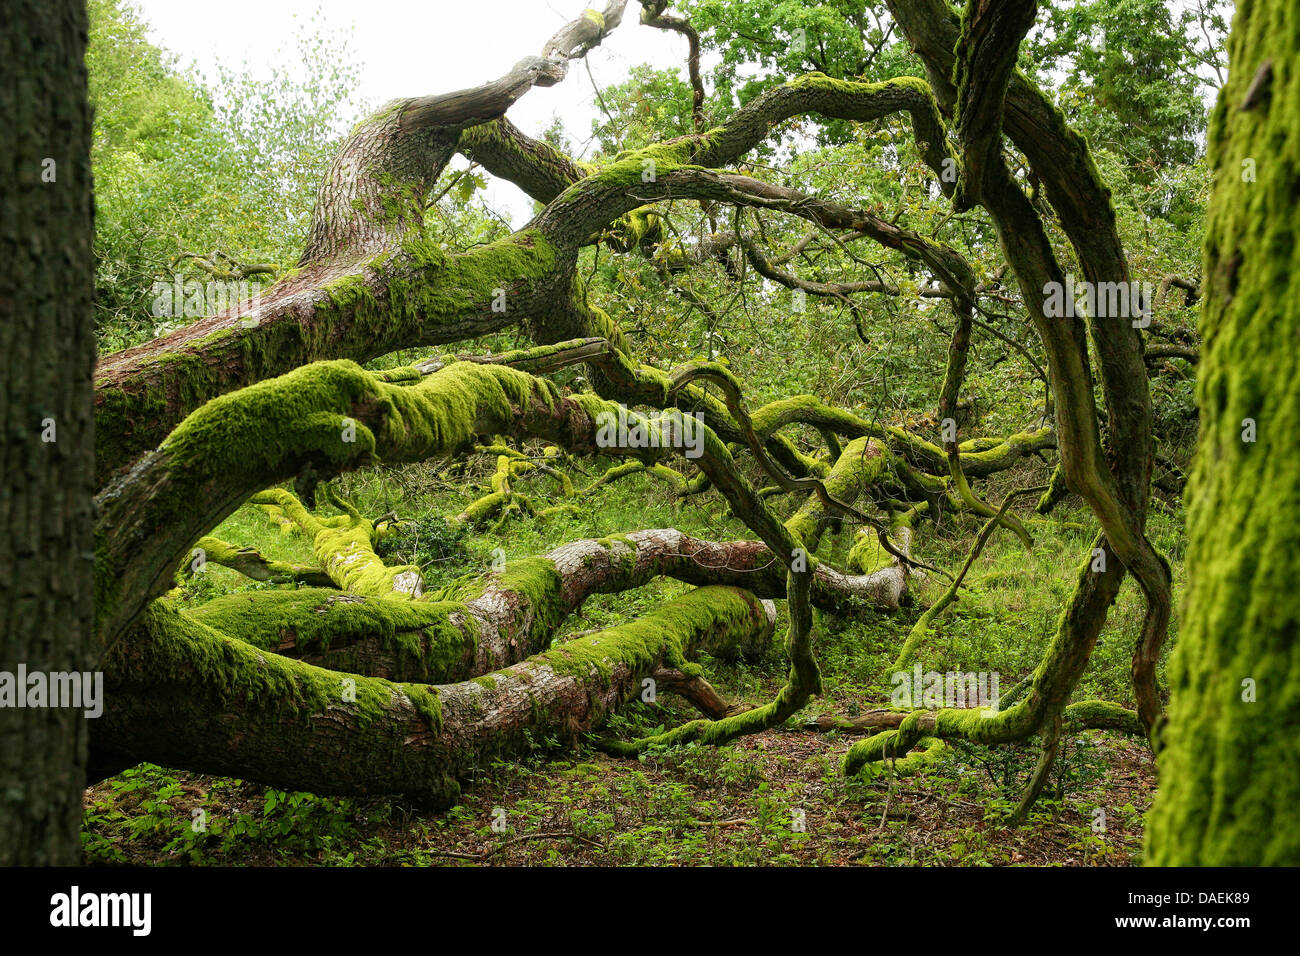 common beech (Fagus sylvatica), mossy branches of an old beech, Germany Stock Photo